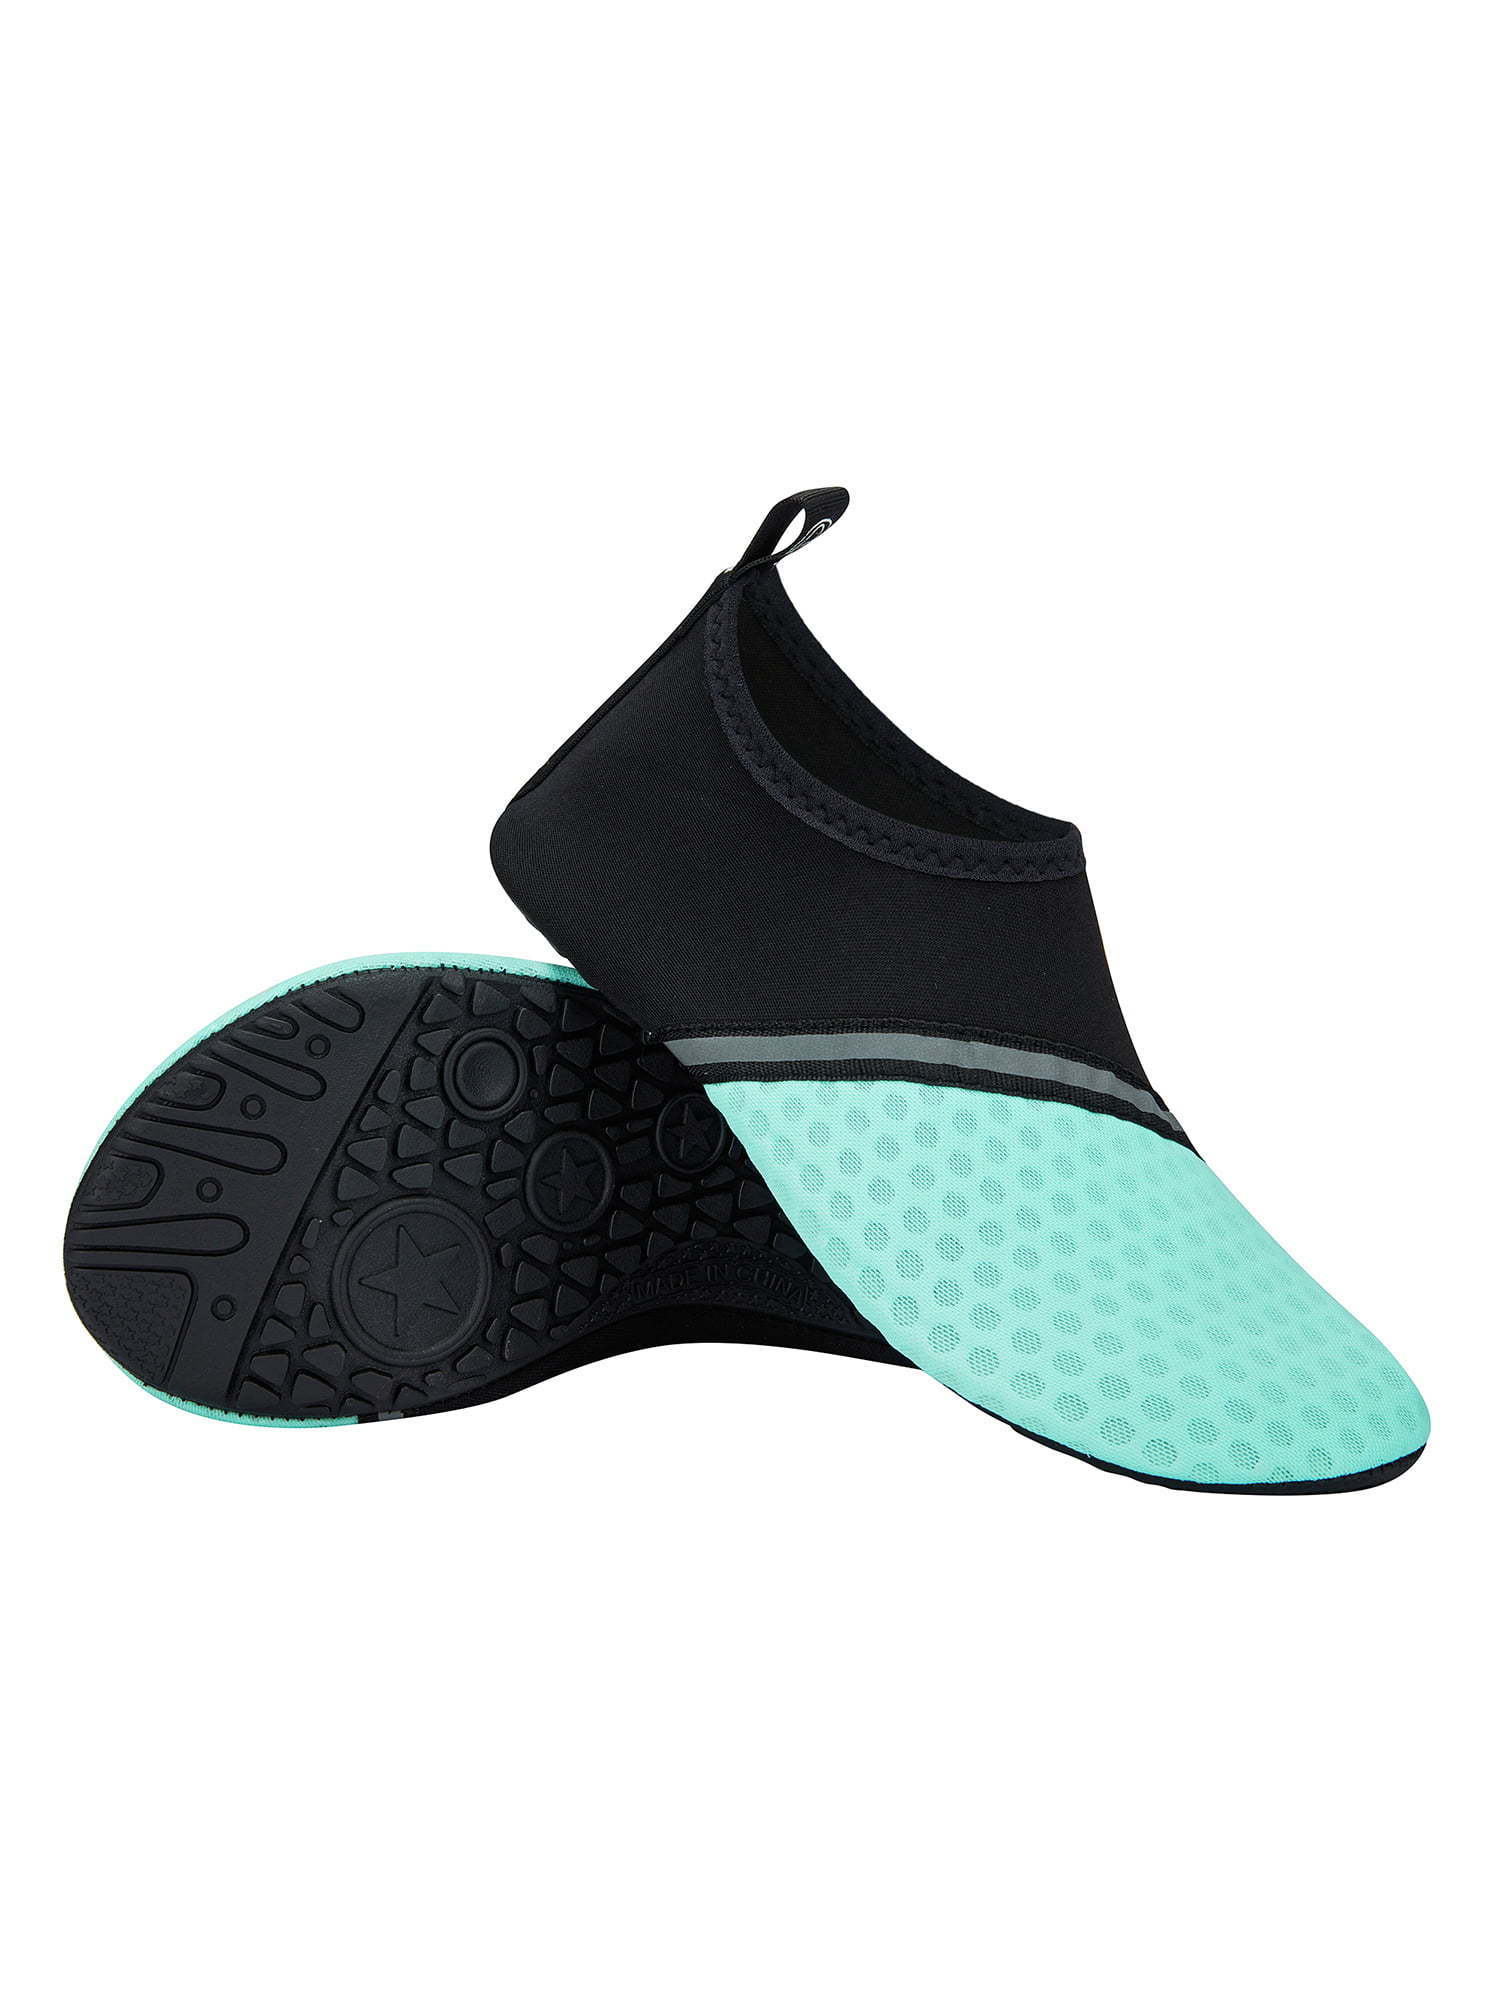 Details about   Women Skin Water Shoes Barefoot Quick Dry Sport Beach Swim Slip On Shoes Exercis